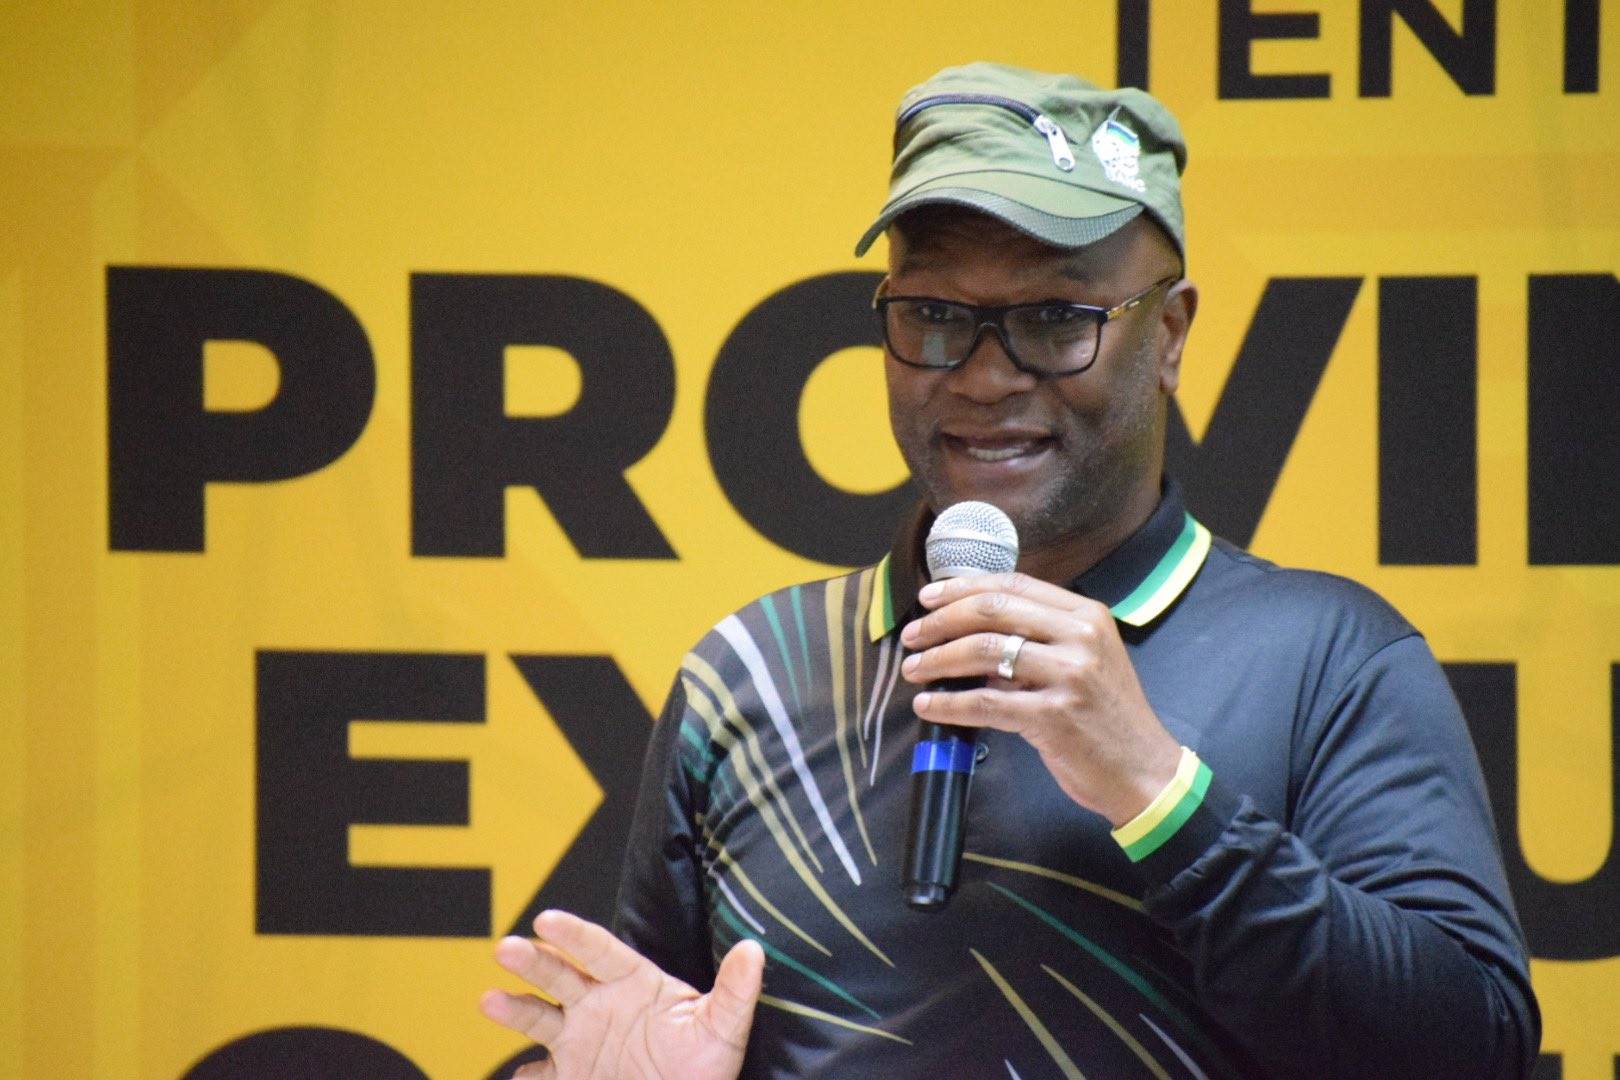 Sport, Arts and Culture Minister Nathi Mthethwa has stumbled from one blunder to another during his tenure. Photo: Twitter